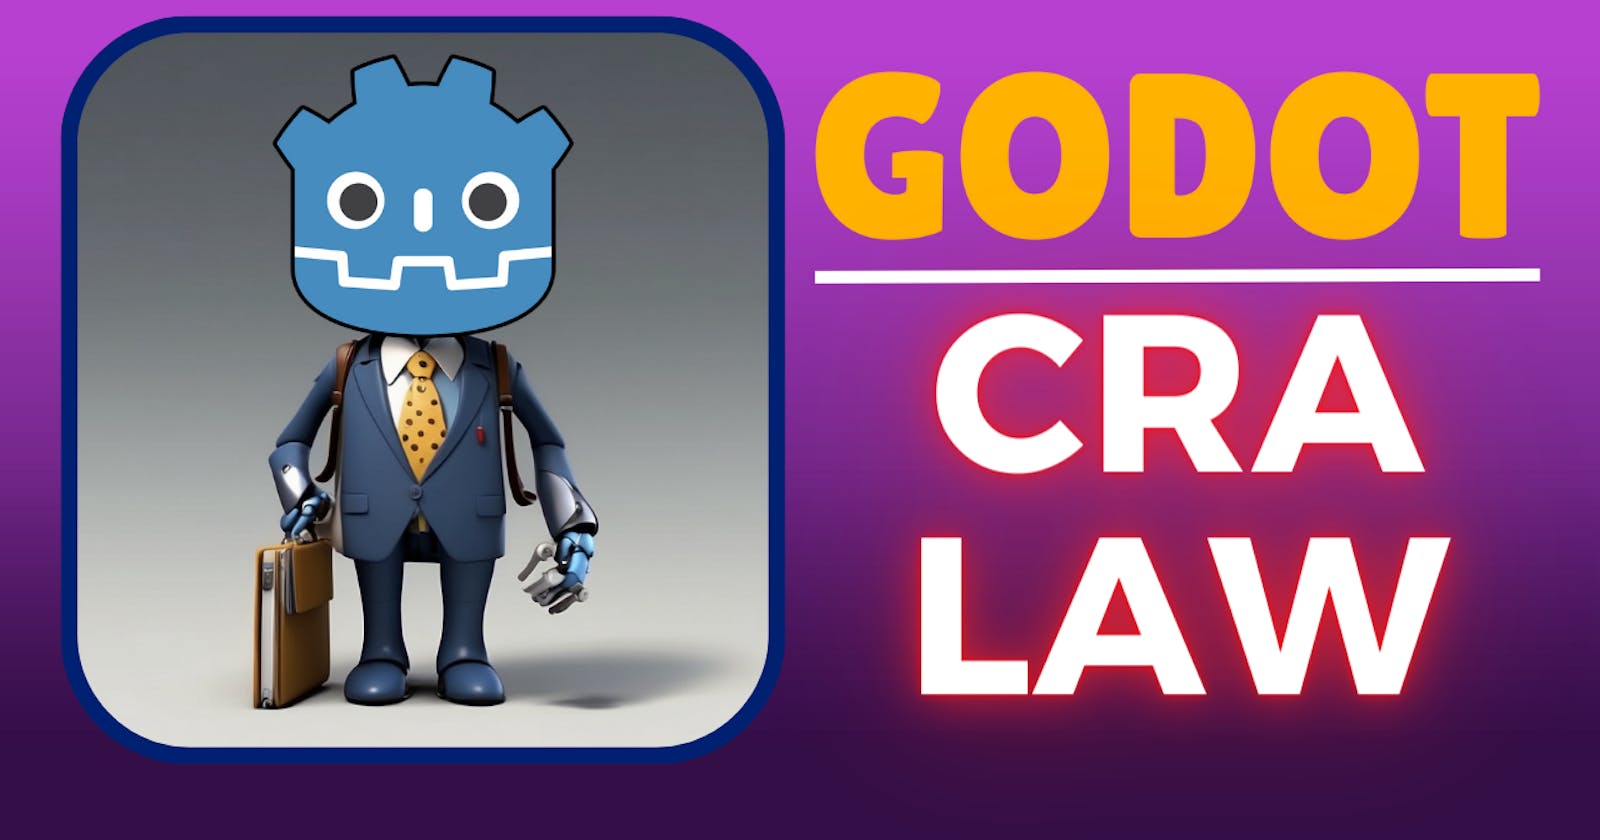 What Godot devs need to know about this new EU law (Cyber Resilience Act)